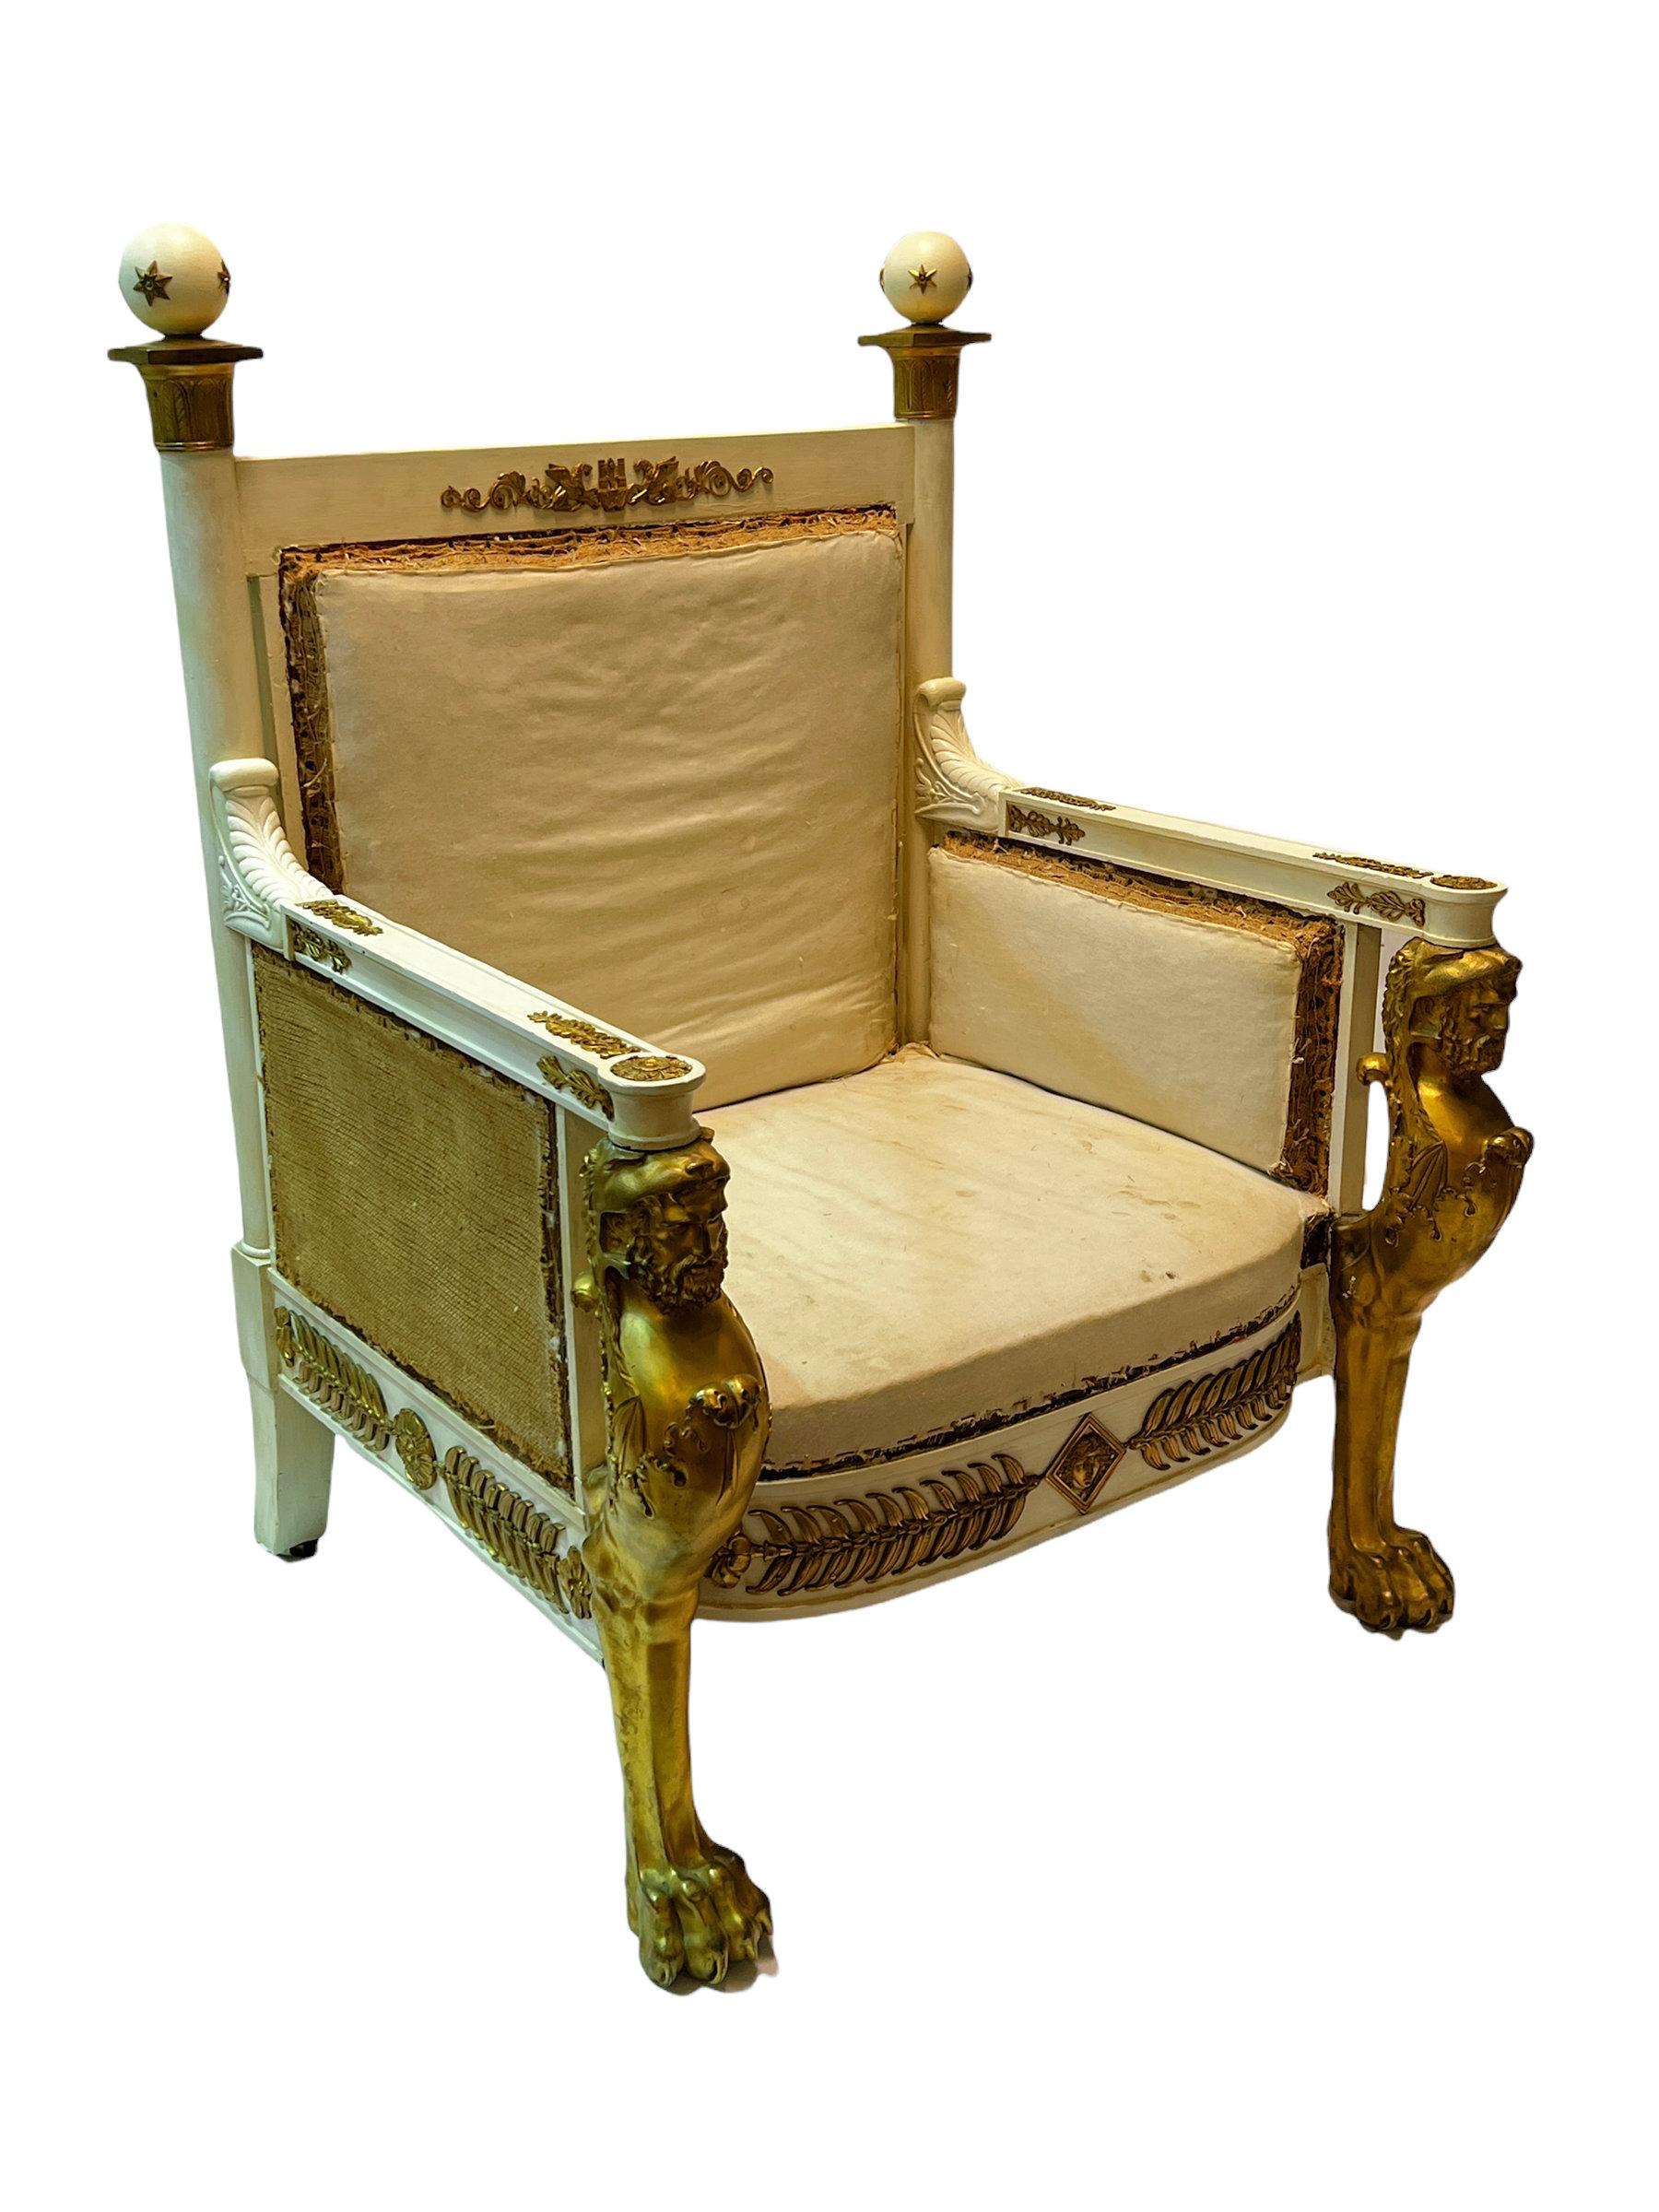 Our ormolu-mounted throne dating from the late nineteenth century is an exceptional example after the original model by Francois-Honore-Georges Jacob-Desmalter (1770-1841). Designed in the Empire style, it is decorated with ormolu bronze arm and leg